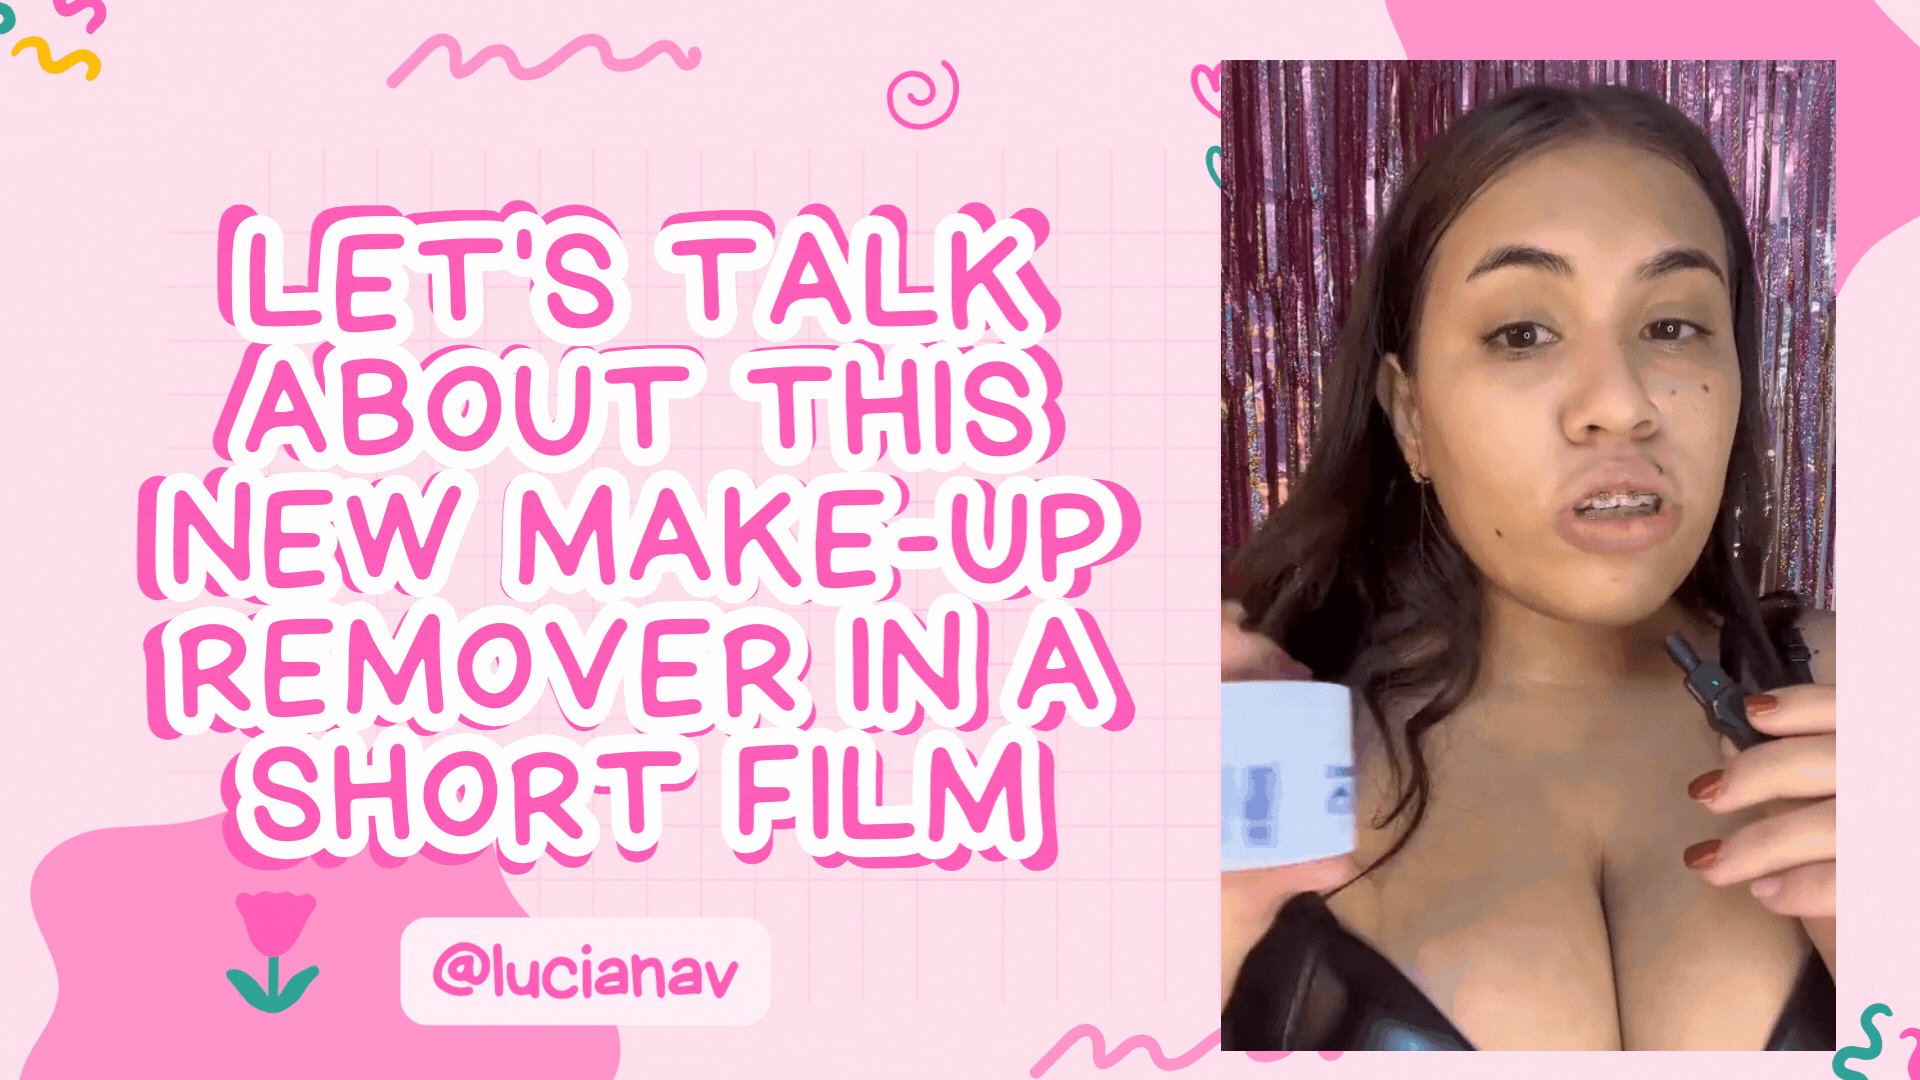 Let's talk about this new make-up remover in a short film.gif